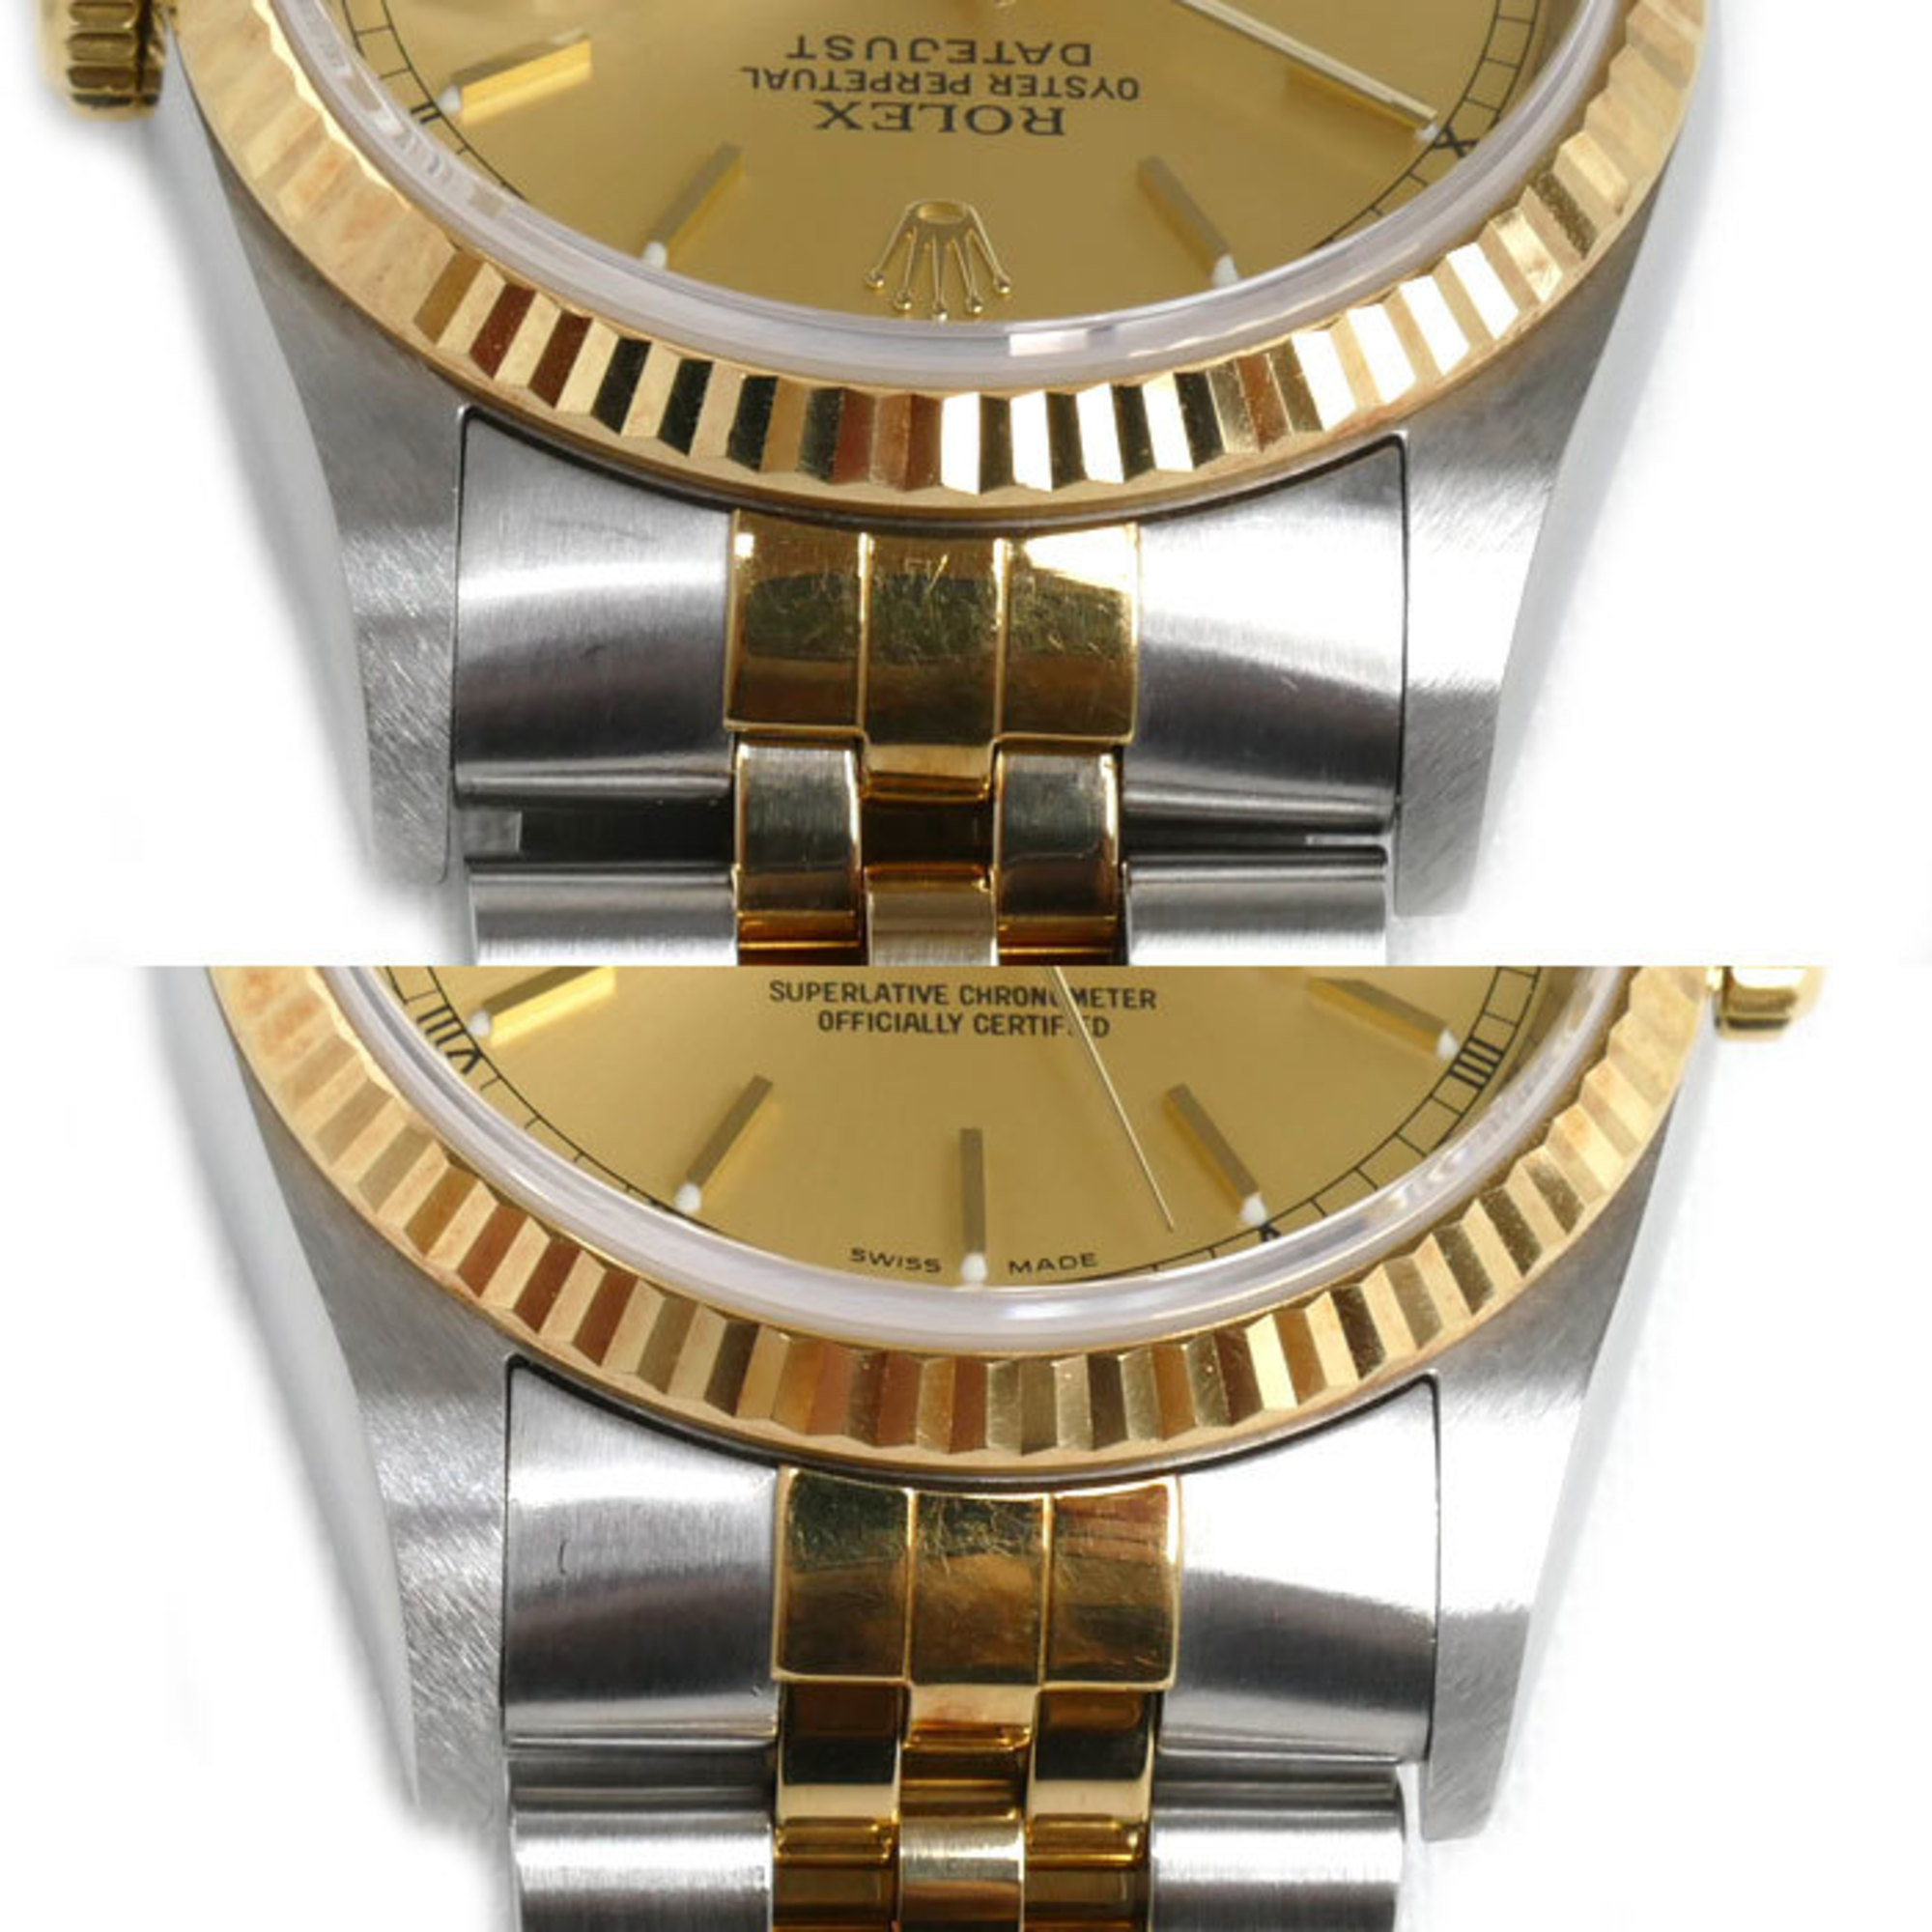 ROLEX Rolex Oyster Perpetual Datejust Watch Automatic Winding 16233 Men's